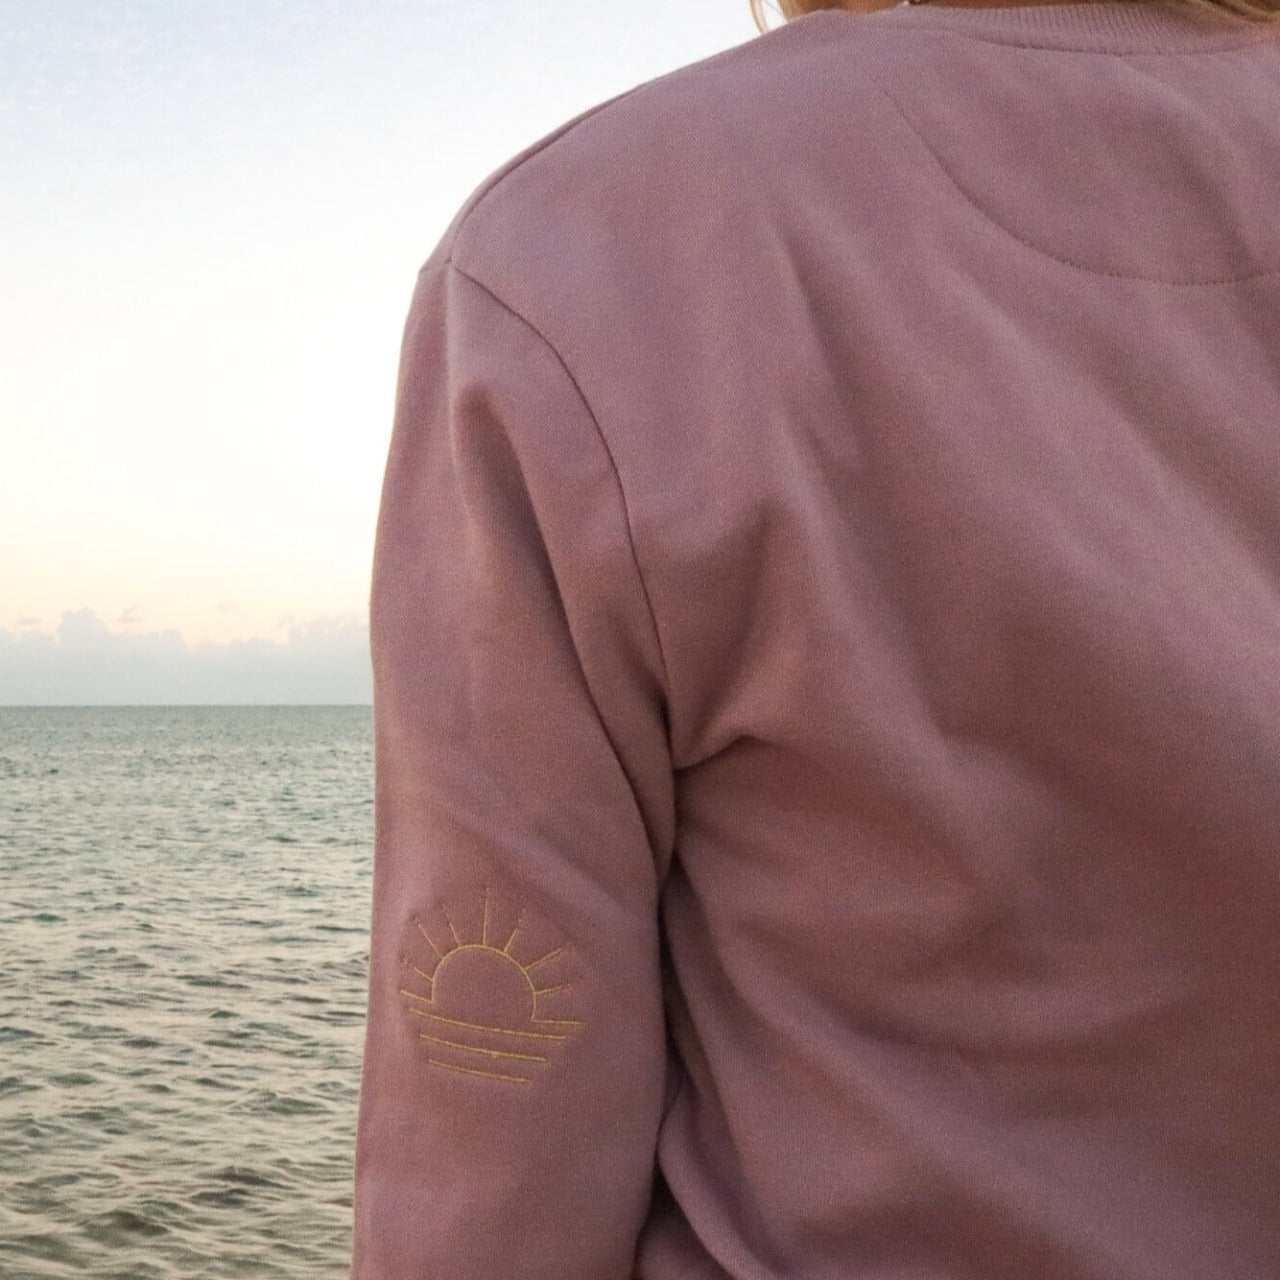 Sunrise, Sunset embroidered detail on back of Sunny State of Mind crewneck sweatshirt by Wandering Waves Surf Company